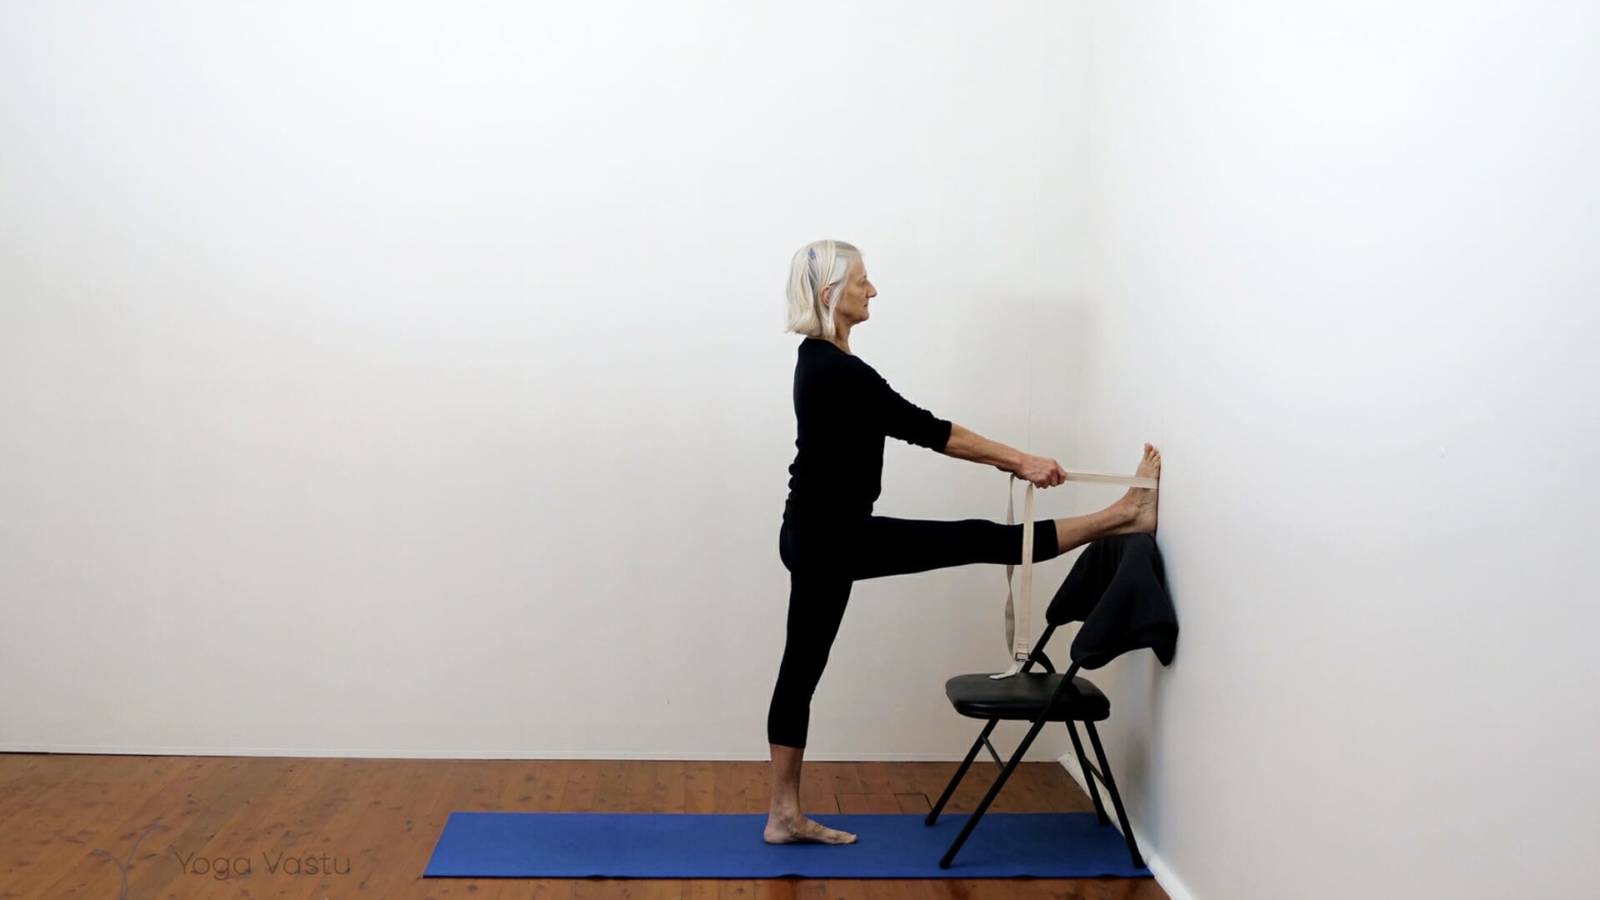 Chair Pose Yoga: Strengthen Your Core and Improve Balance